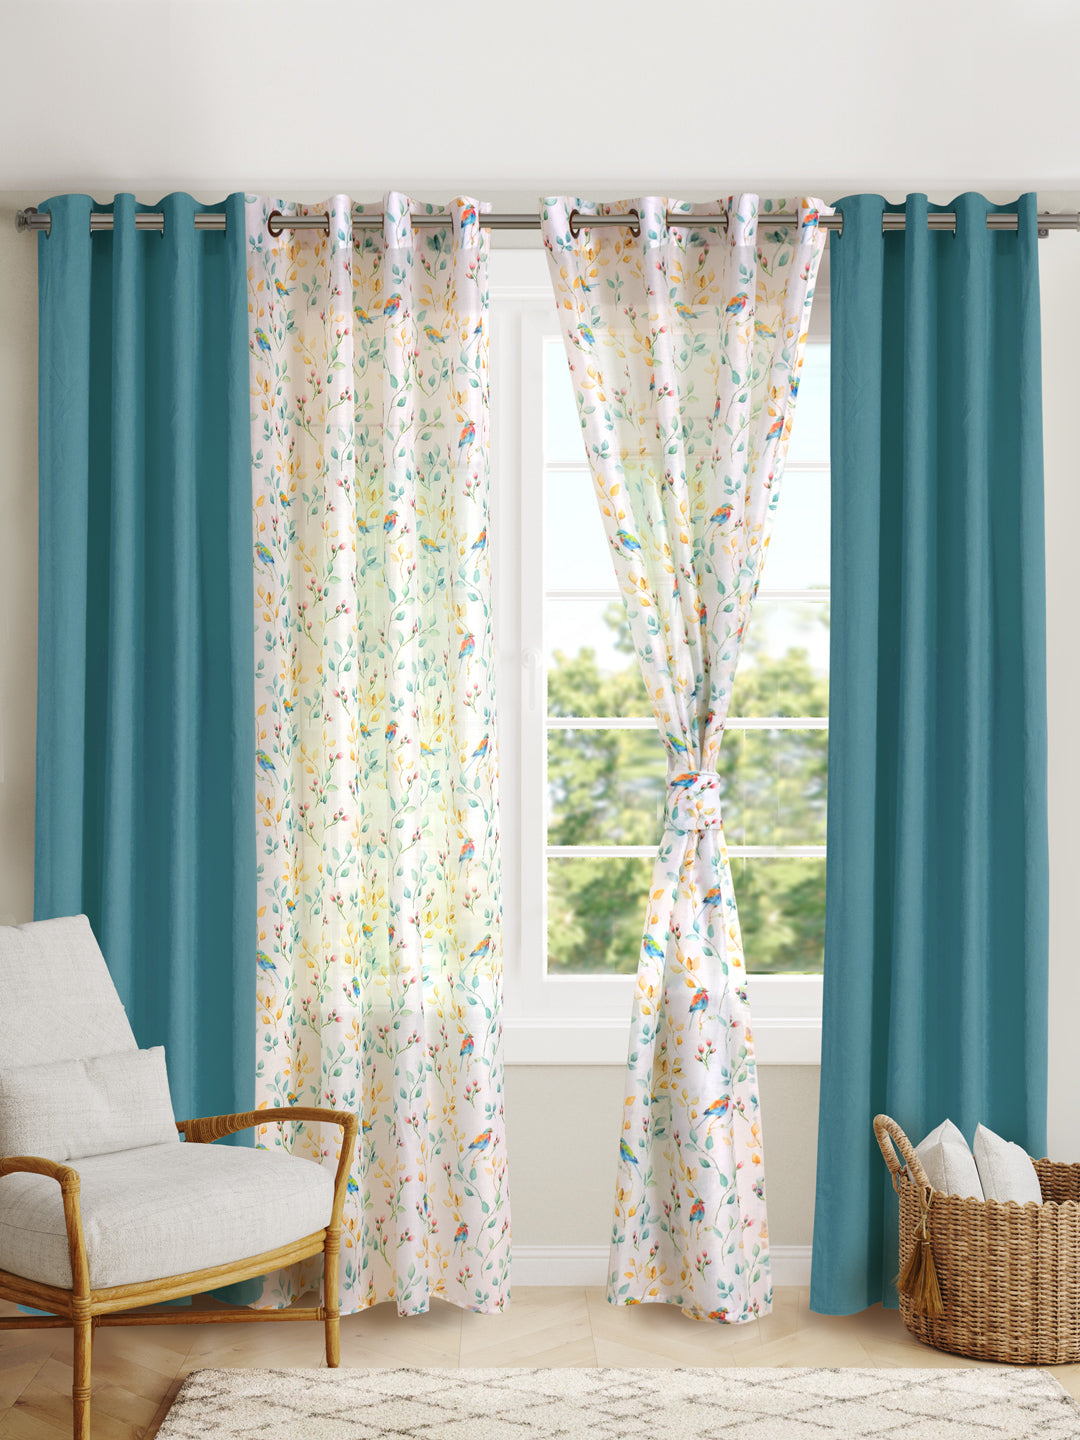 Blanc9 Set Of 4 Fauna Printed With Blue Plain 7Ft. Curtains